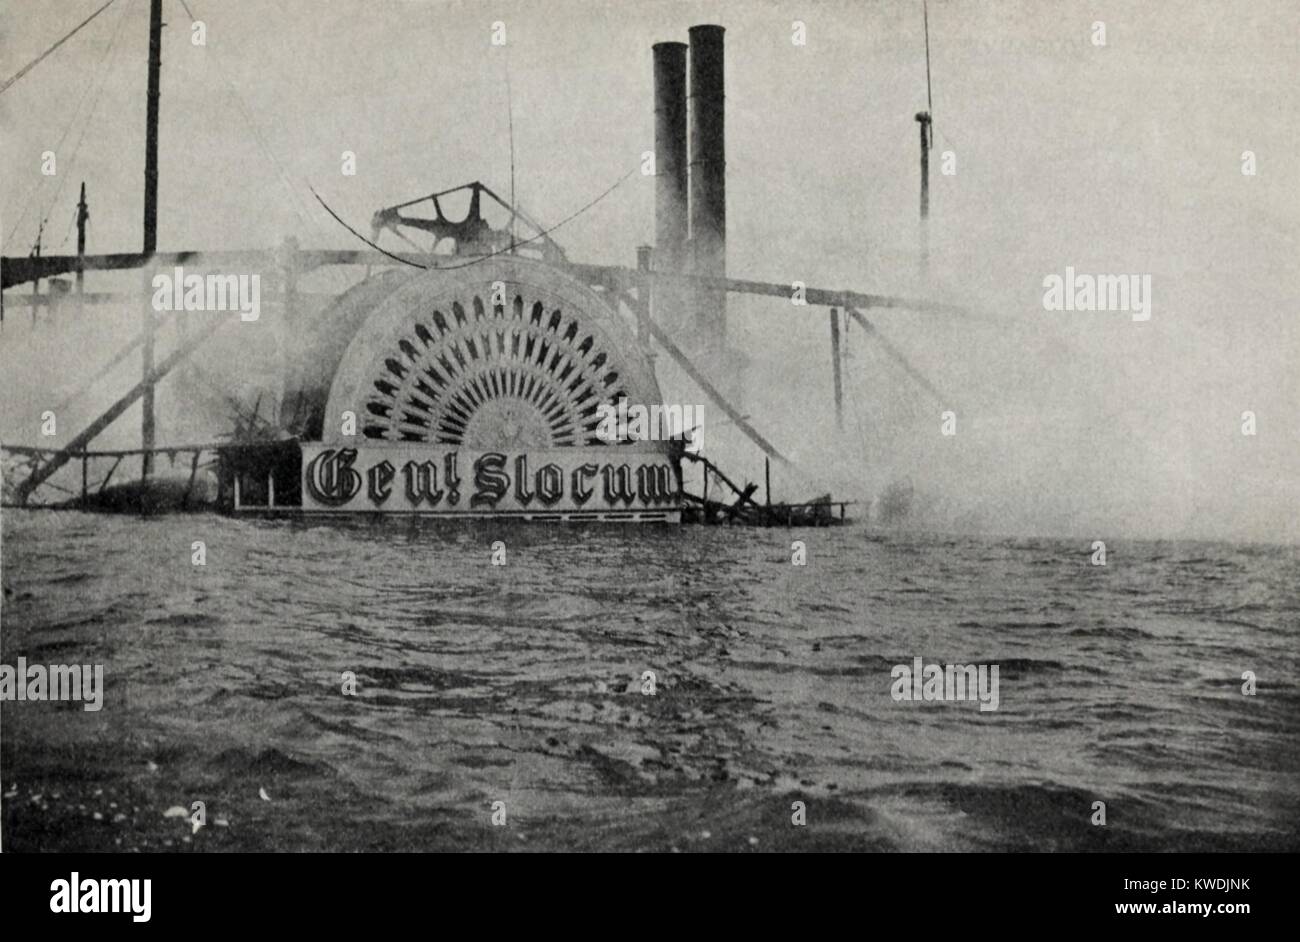 Smoking wreck of the GENERAL SLOCUM showing the housing of the paddle wheel, June 15, 1904. 1,021, mostly women and children, were killed by the excursion boat fire or drowning (BSLOC 2017 17 111) Stock Photo